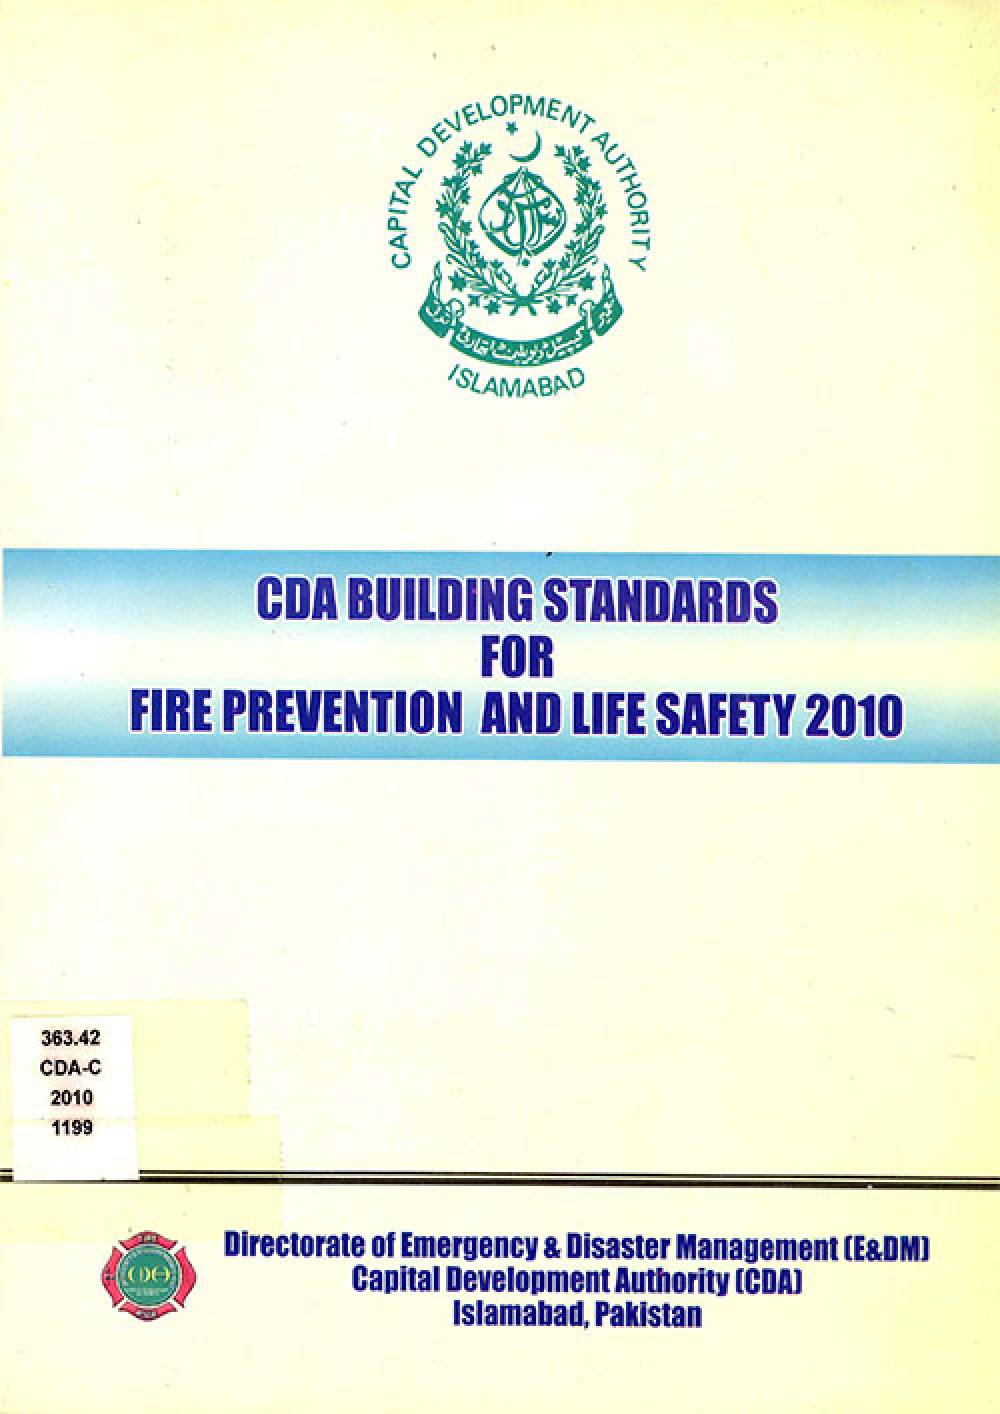 CDA Building Standards for Fire Prevention and Life Safety 2010